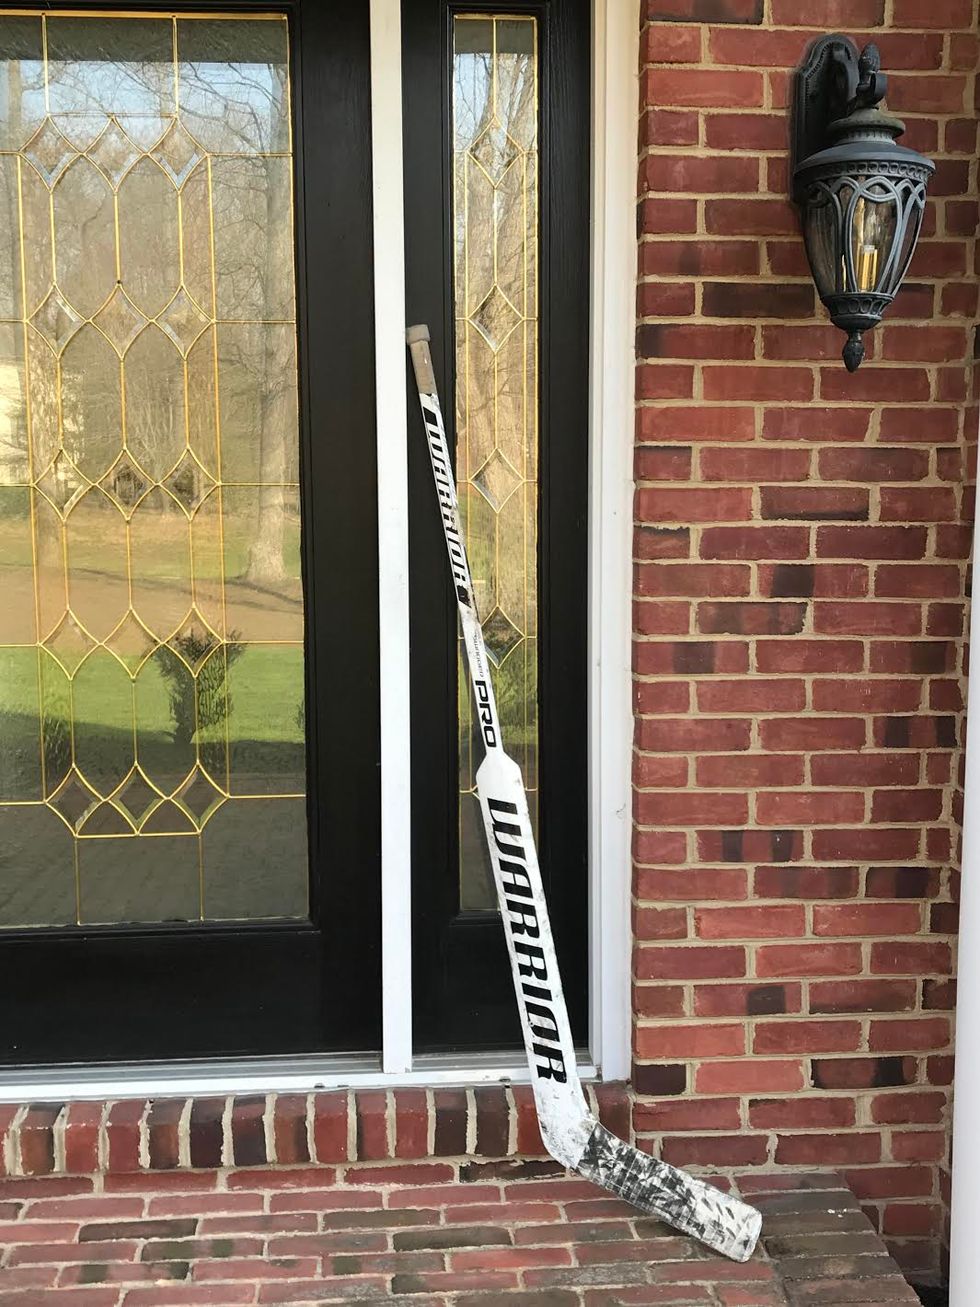 The Tragedy That Started The #PutYourSticksOut Movement